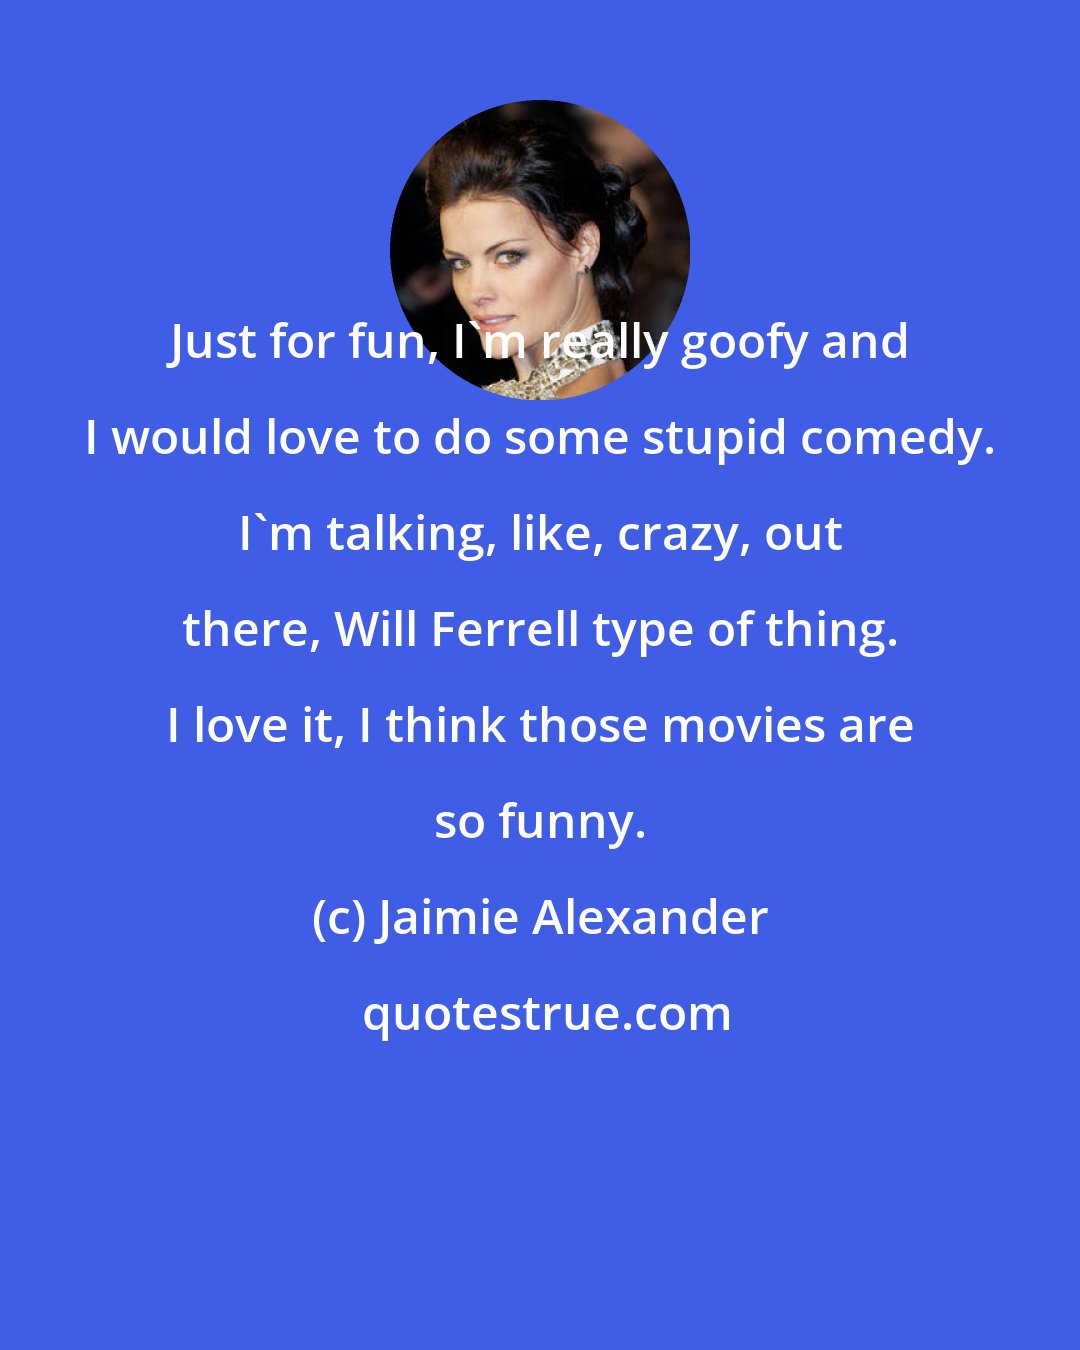 Jaimie Alexander: Just for fun, I'm really goofy and I would love to do some stupid comedy. I'm talking, like, crazy, out there, Will Ferrell type of thing. I love it, I think those movies are so funny.